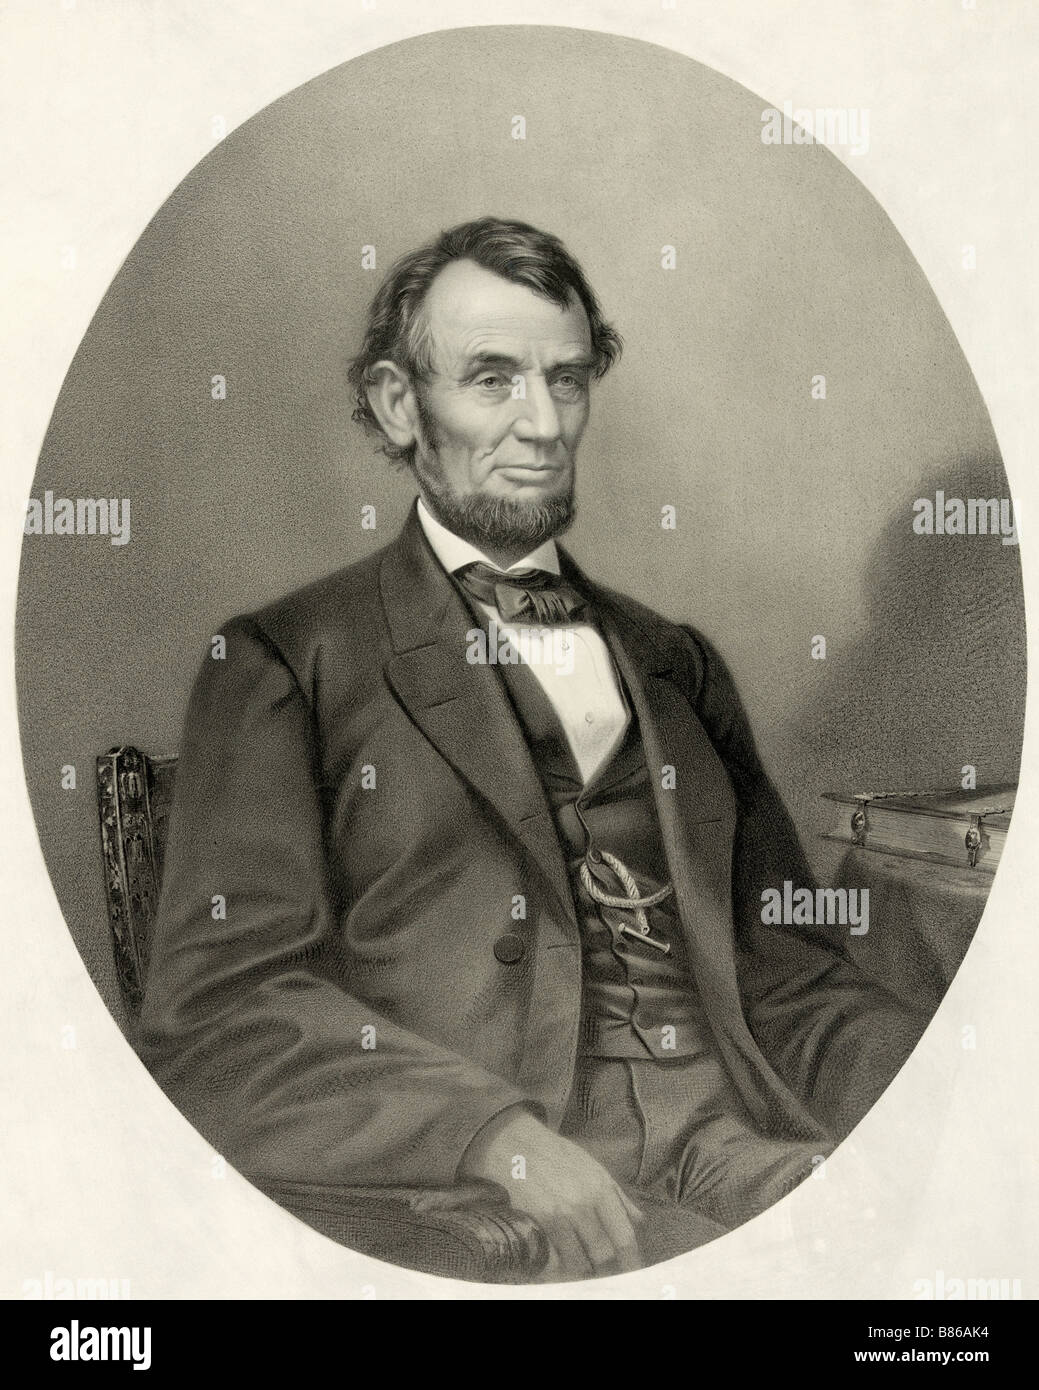 Abraham Lincoln, 1809 - 1865. 16th President of the United States. From a photograph by Matthew Brady taken in 1865. Stock Photo